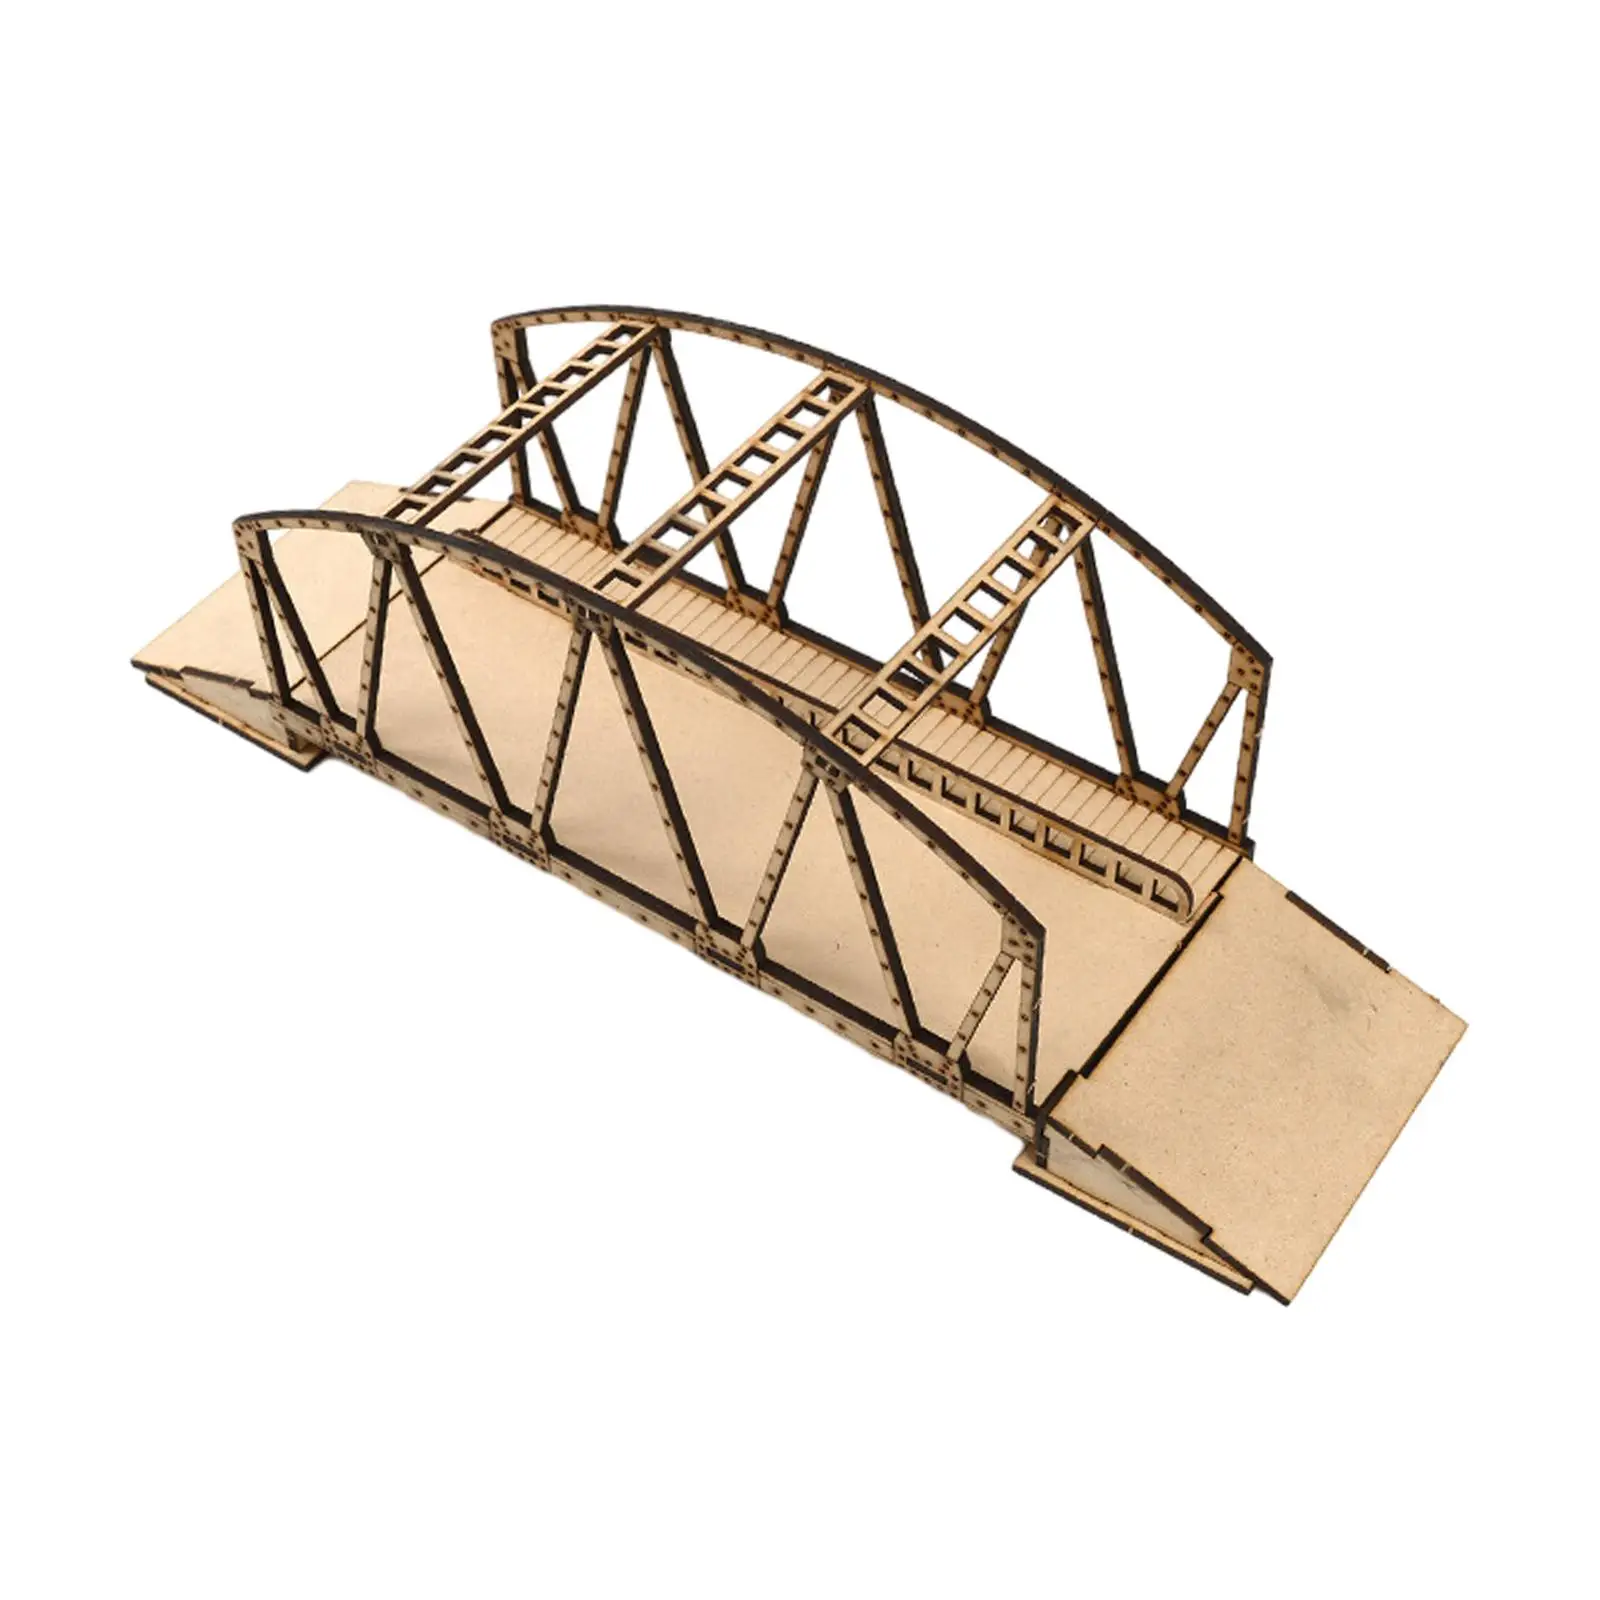 1/72 European Wooden Bridge Model Kits 3D Puzzle Unfinished Collection Handmade Wood Construction DIY Wooden Toy for Diorama